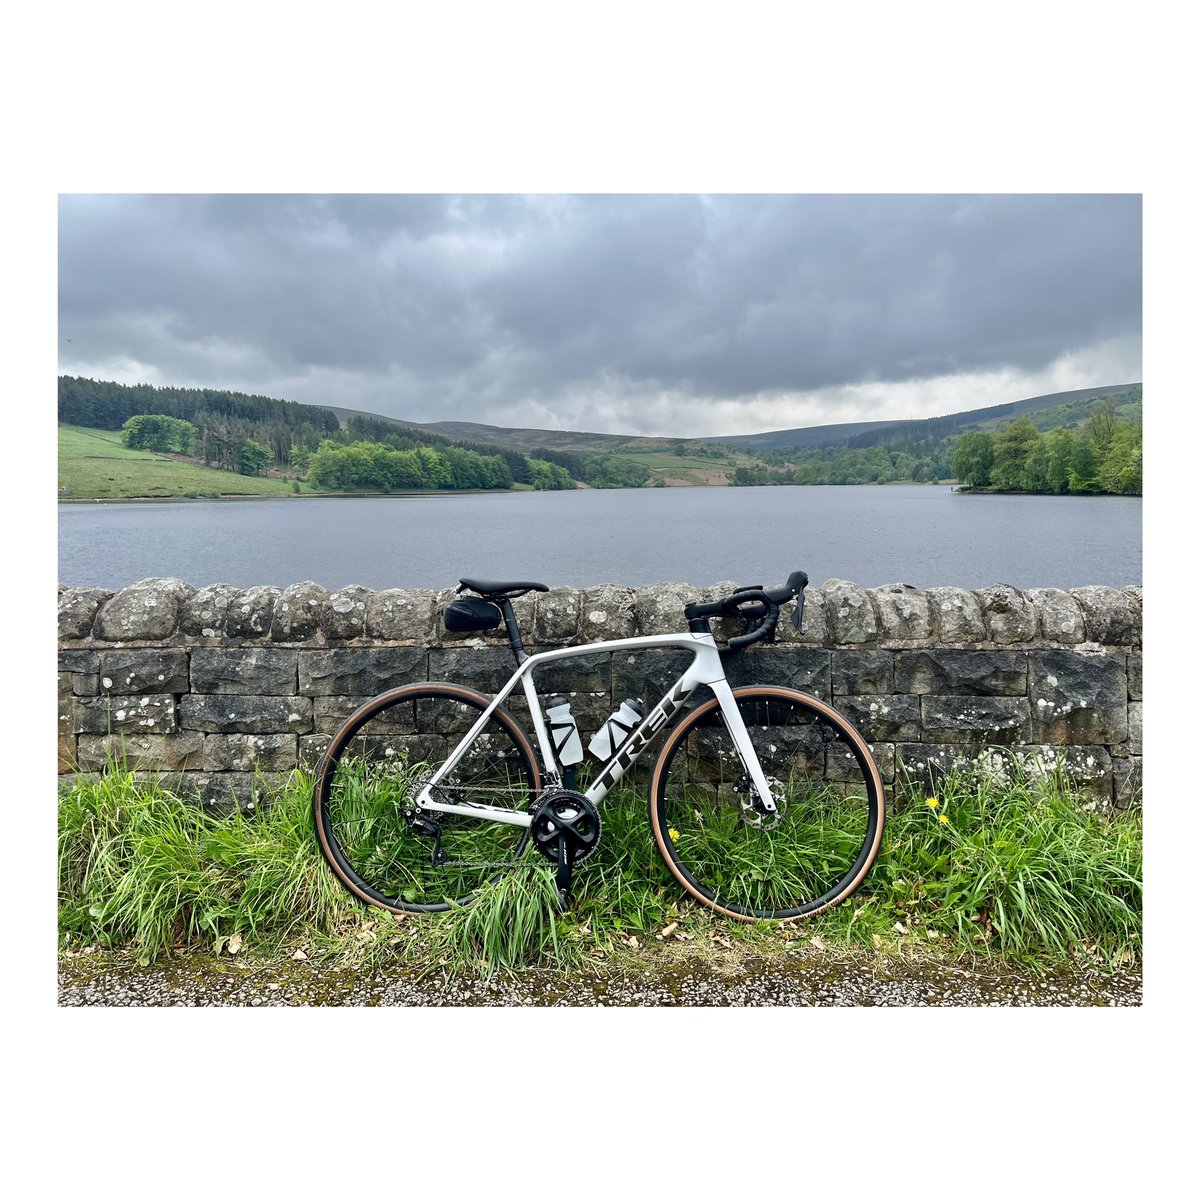 A day off work means a day spent riding!👌🏻 This time out on the @trekbikes Emonda to see how my climbing legs are. I can confirm that Goyt’s Lane up to Long Hill is brutal following the climb up from #kettleshulme. Great ride though & good to be out. #goodvibesandbikerides